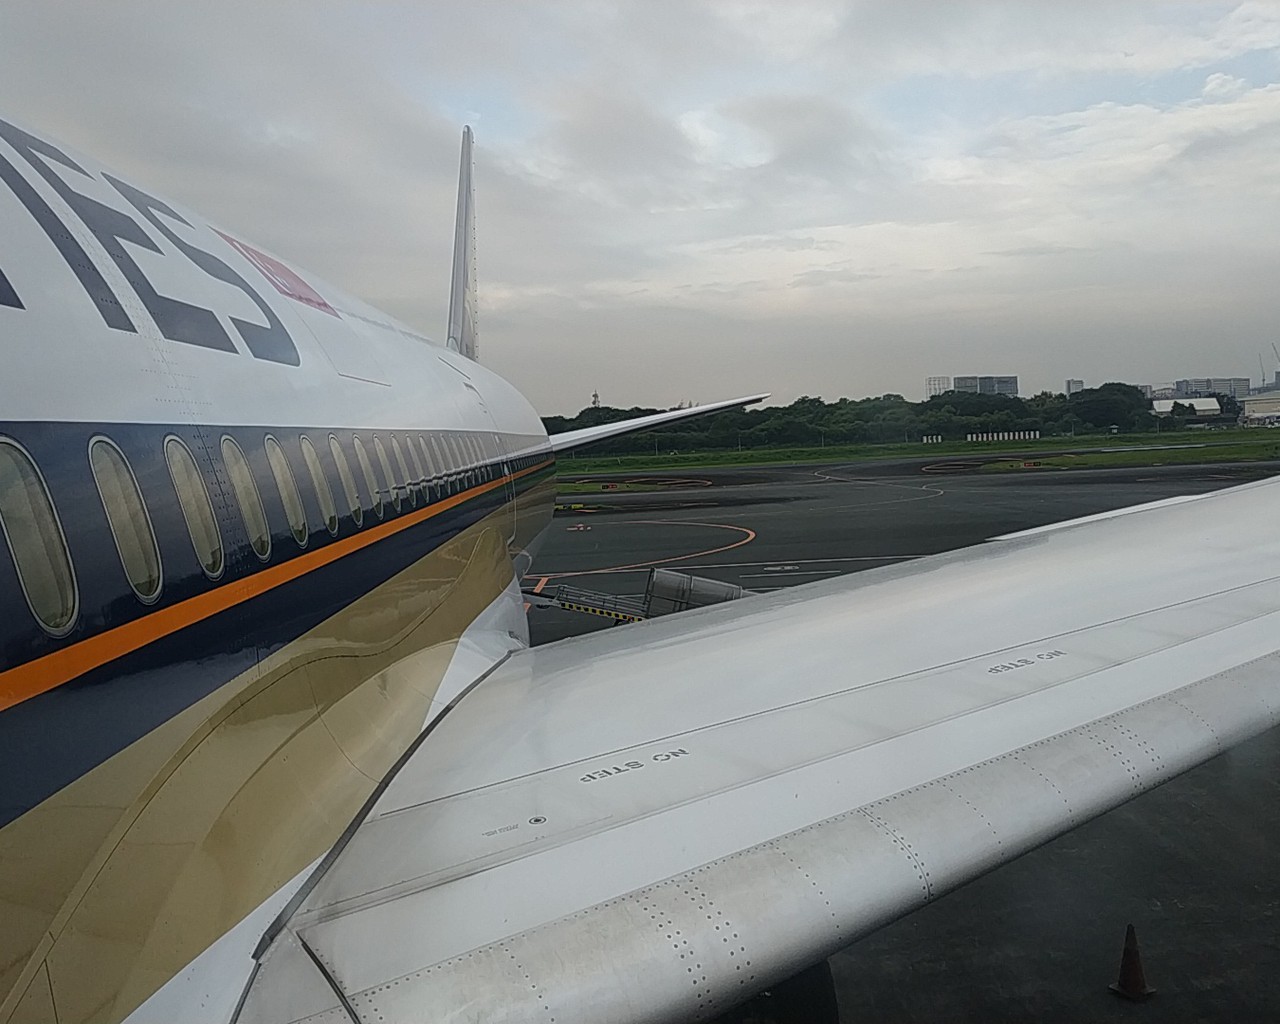 Review of Singapore Airlines flight from Manila to Singapore in Economy